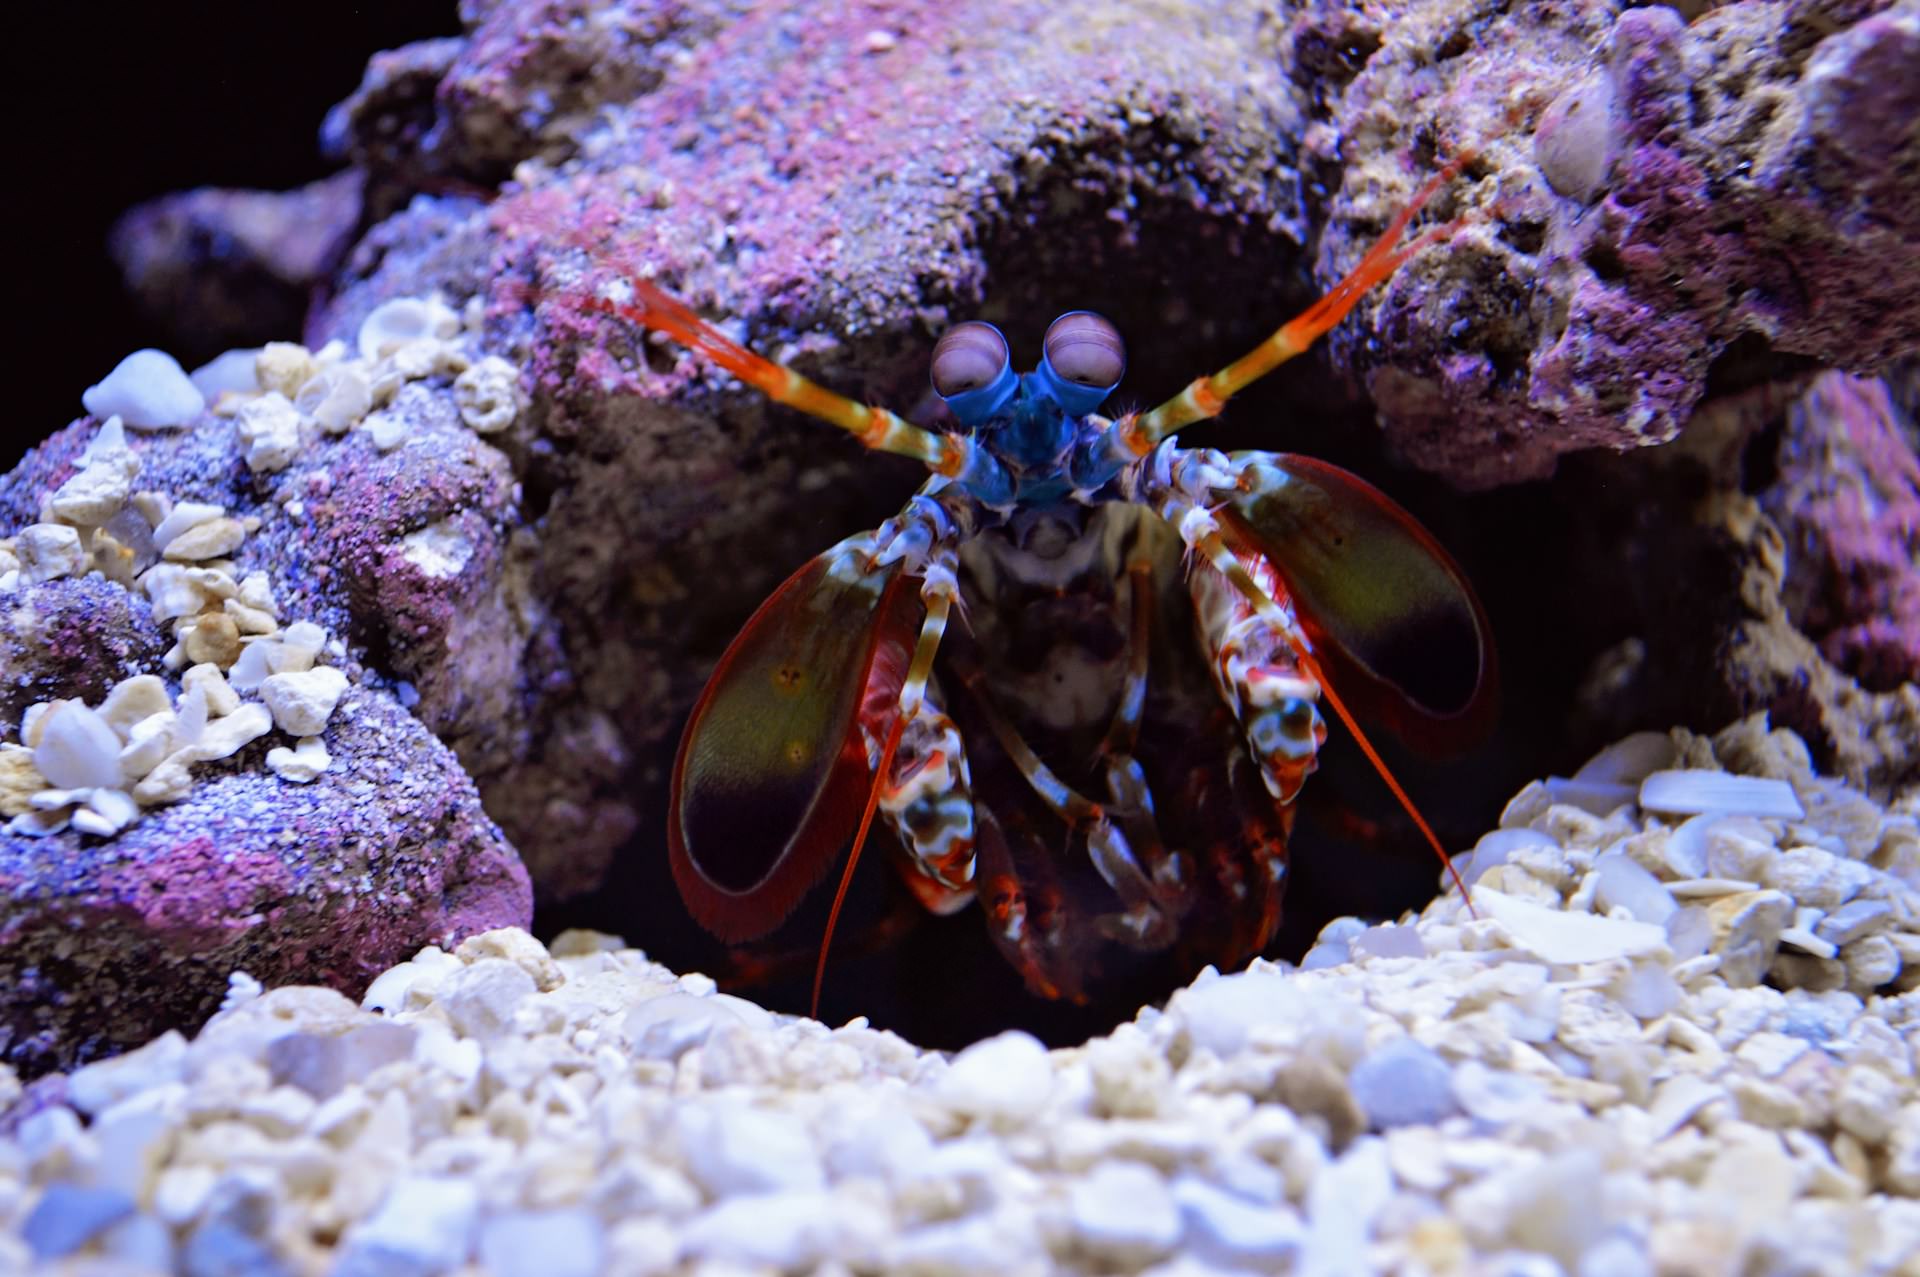 The mantis shrimp possesses one of the most complex visual systems in the animal kingdom. With 16 color receptors (compared to humans' three), they can perceive a vast array of colors, including ultraviolet light, and even detect polarized light.